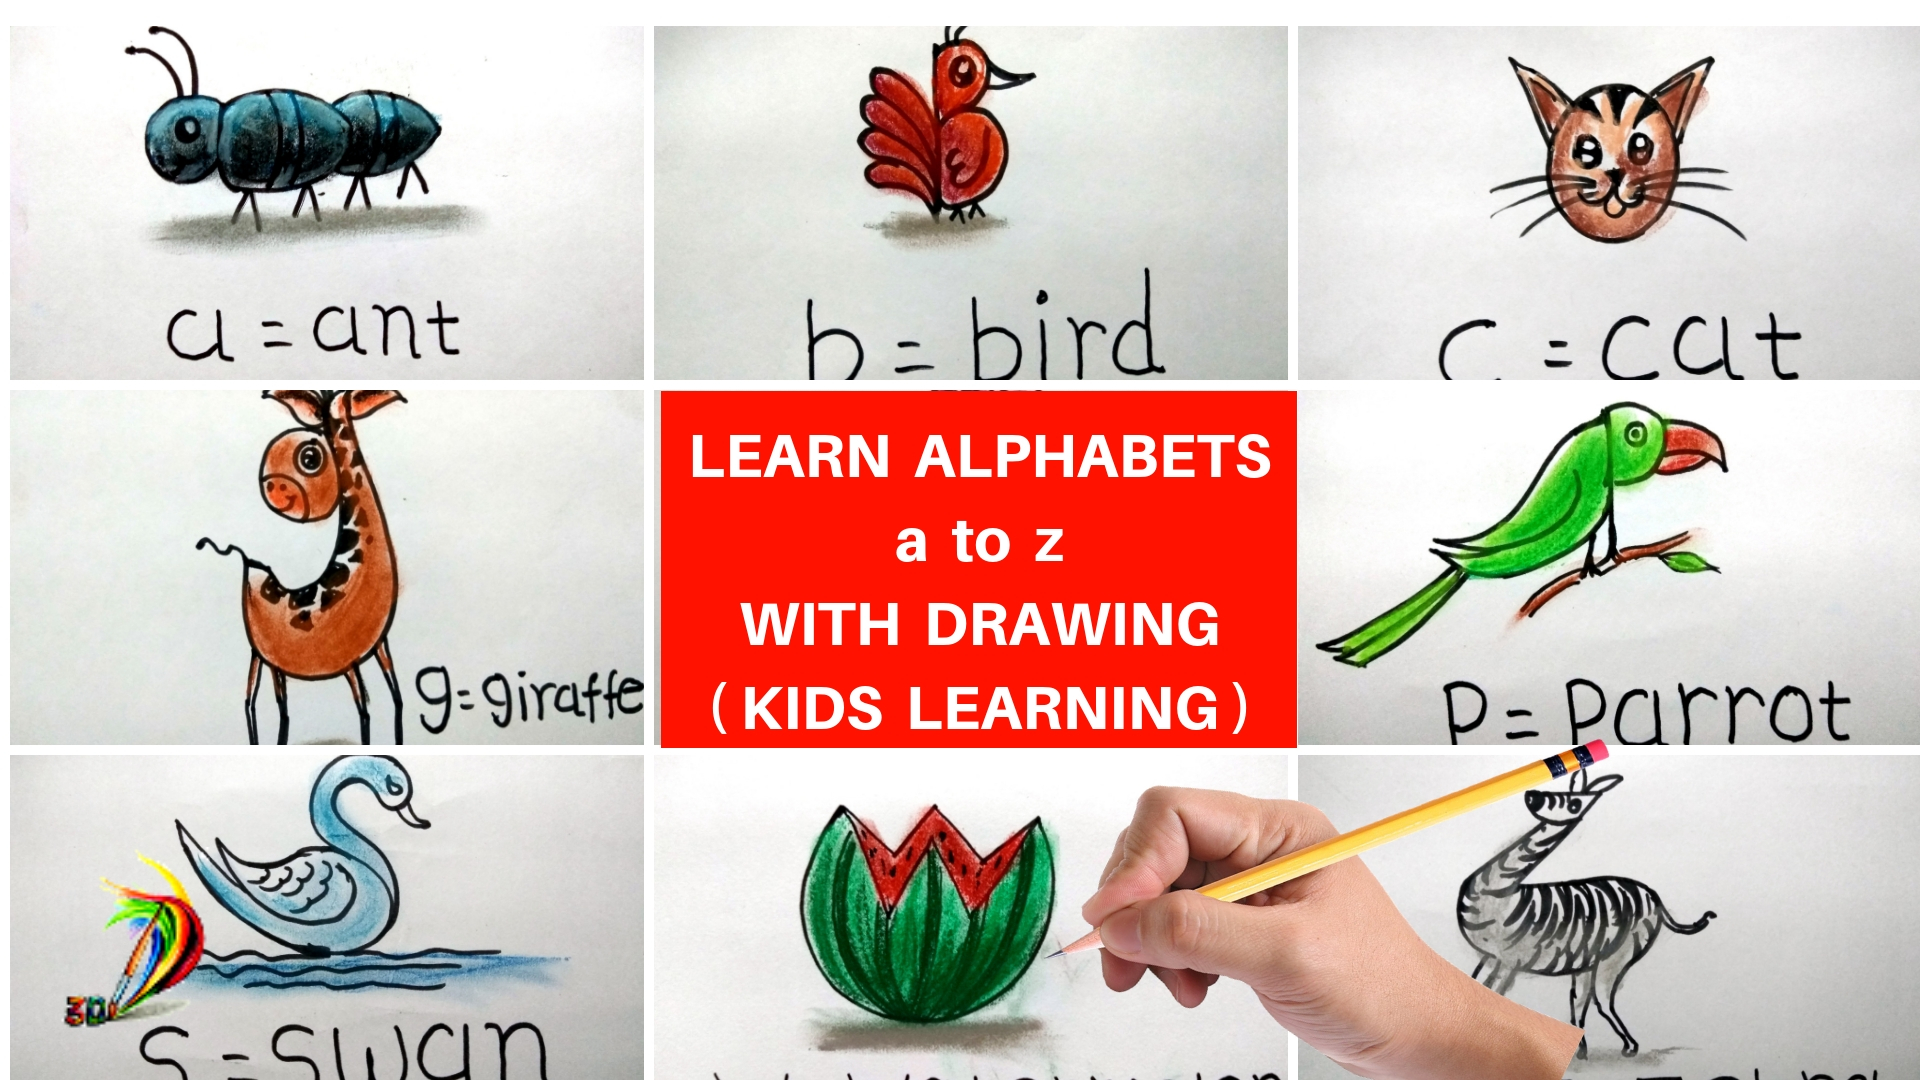 Easy drawing tutorials for kids to learn alphabets a to z